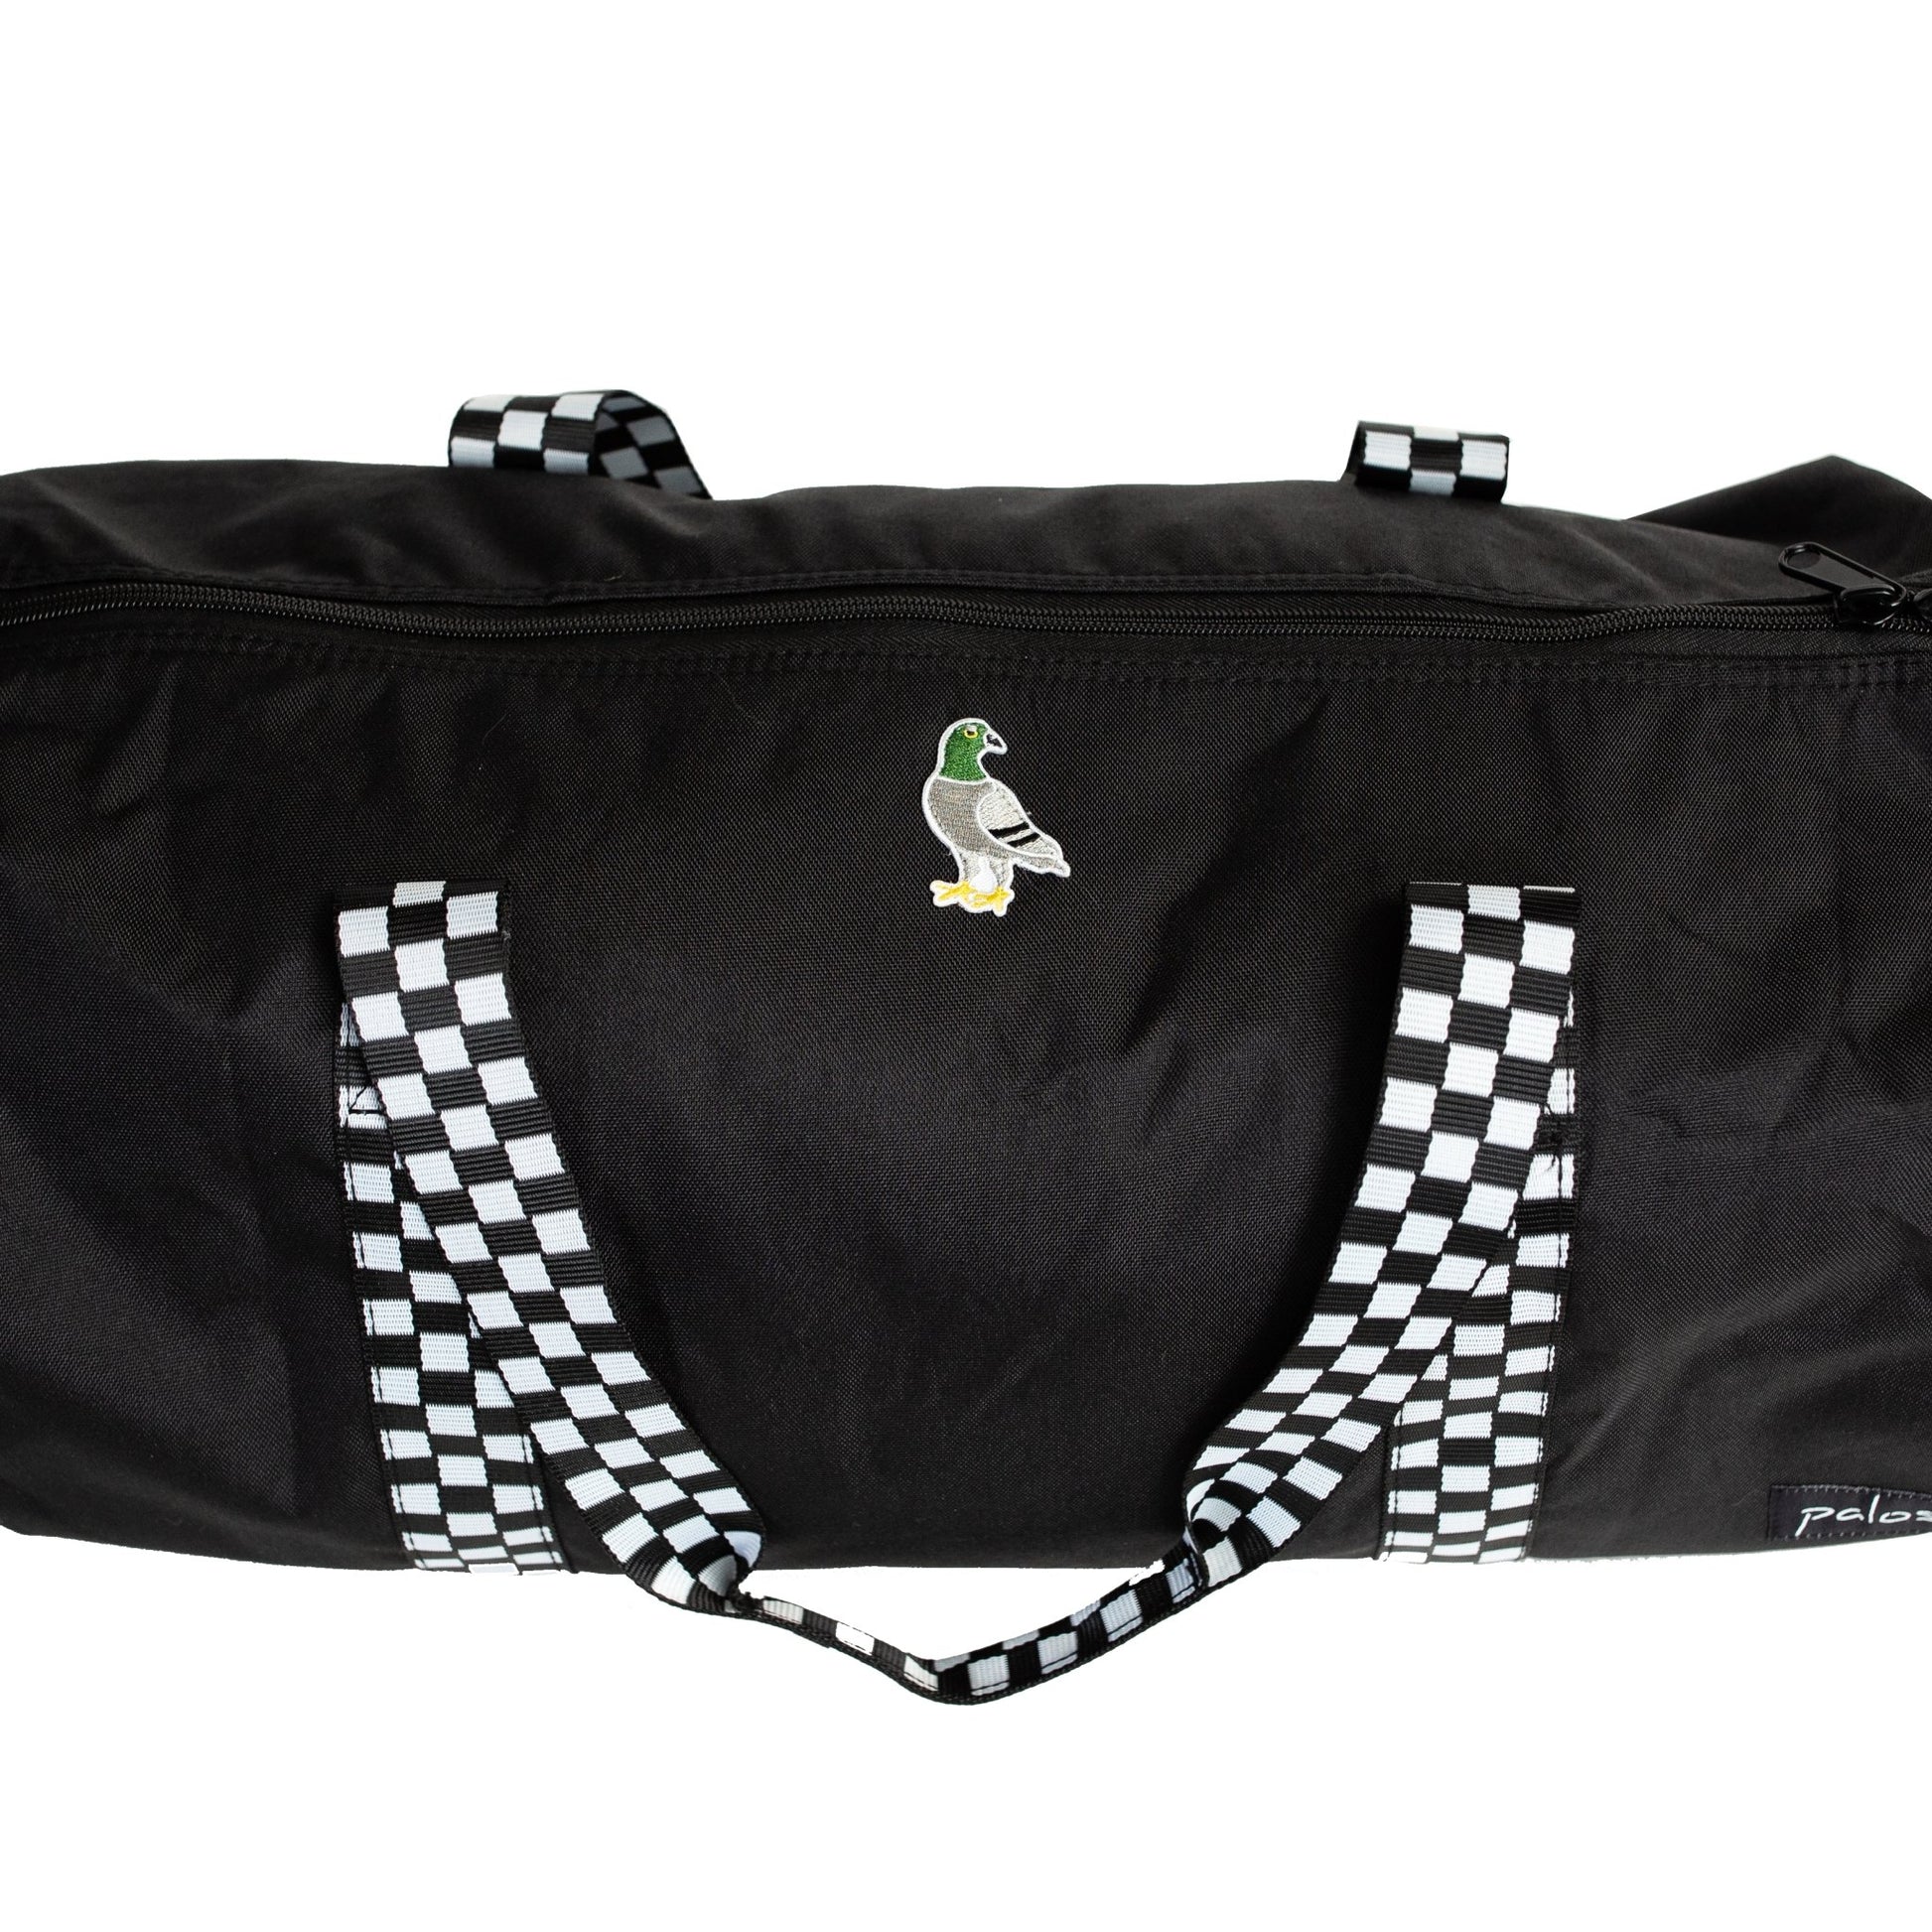 INTERESTPRINT Black and White Checkered Pattern Outdoor Sports Travel  Duffel Bag